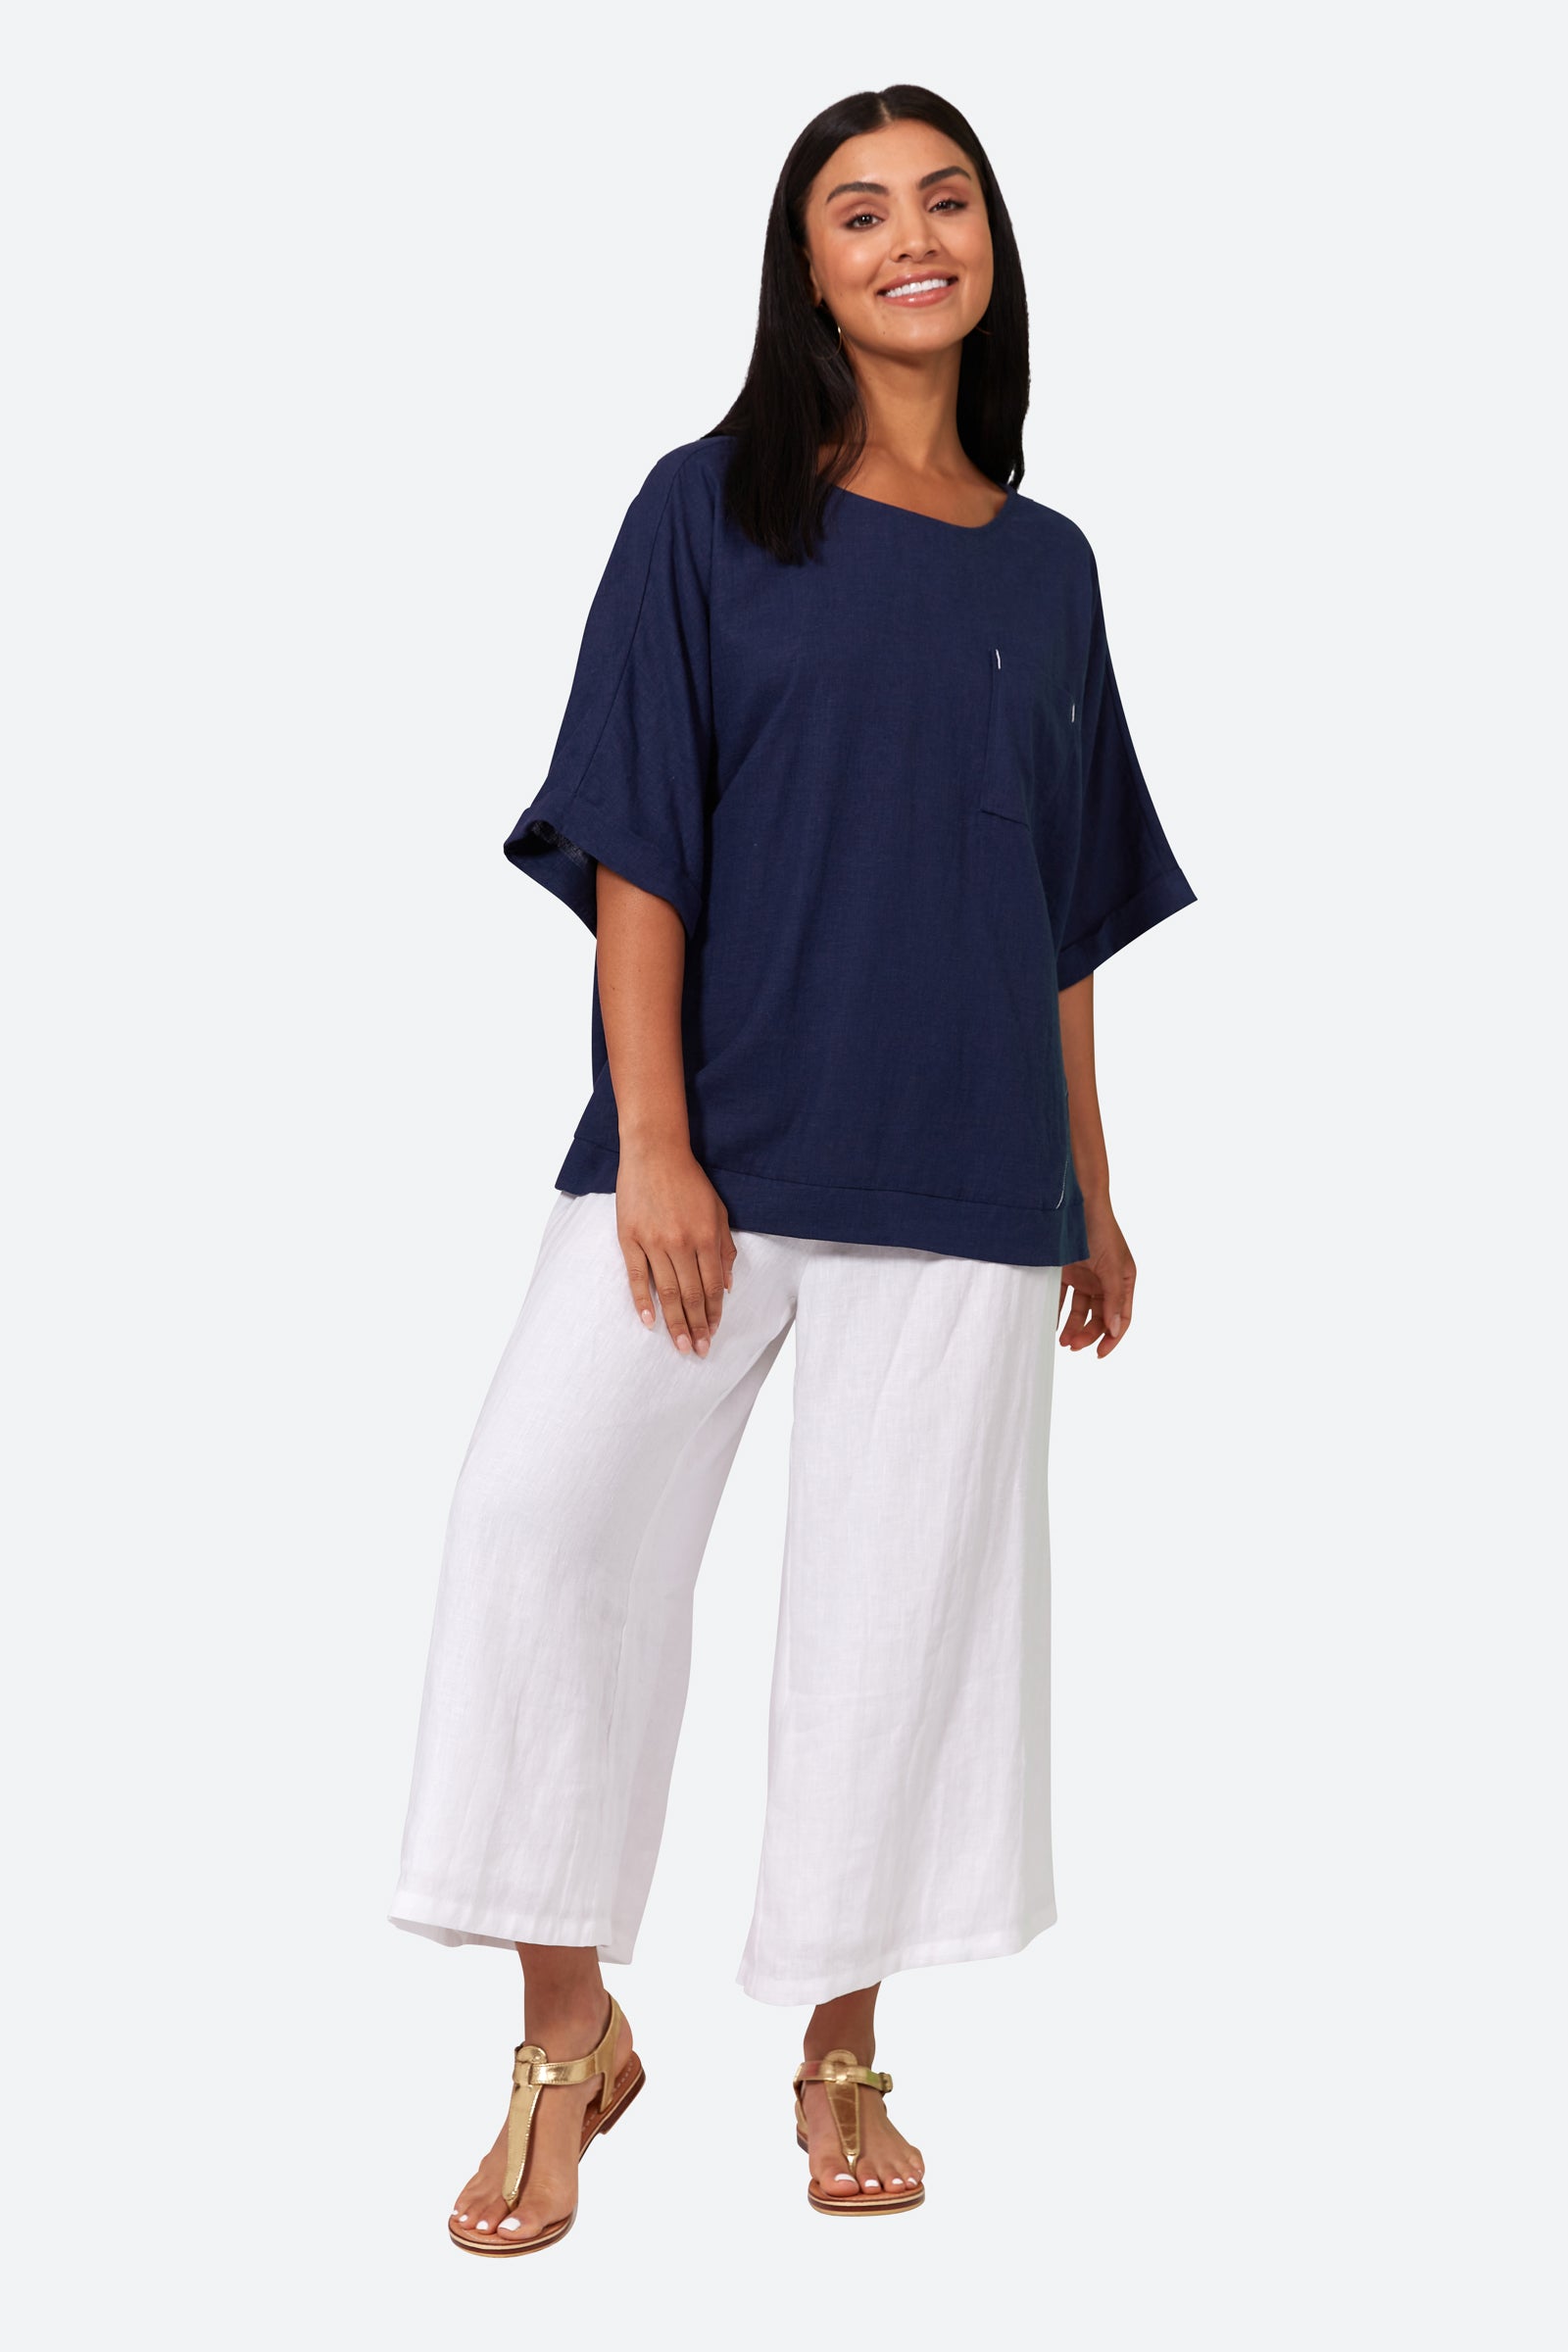 Verve Relax Top - Sapphire - eb&ive Clothing - Top S/S One Size